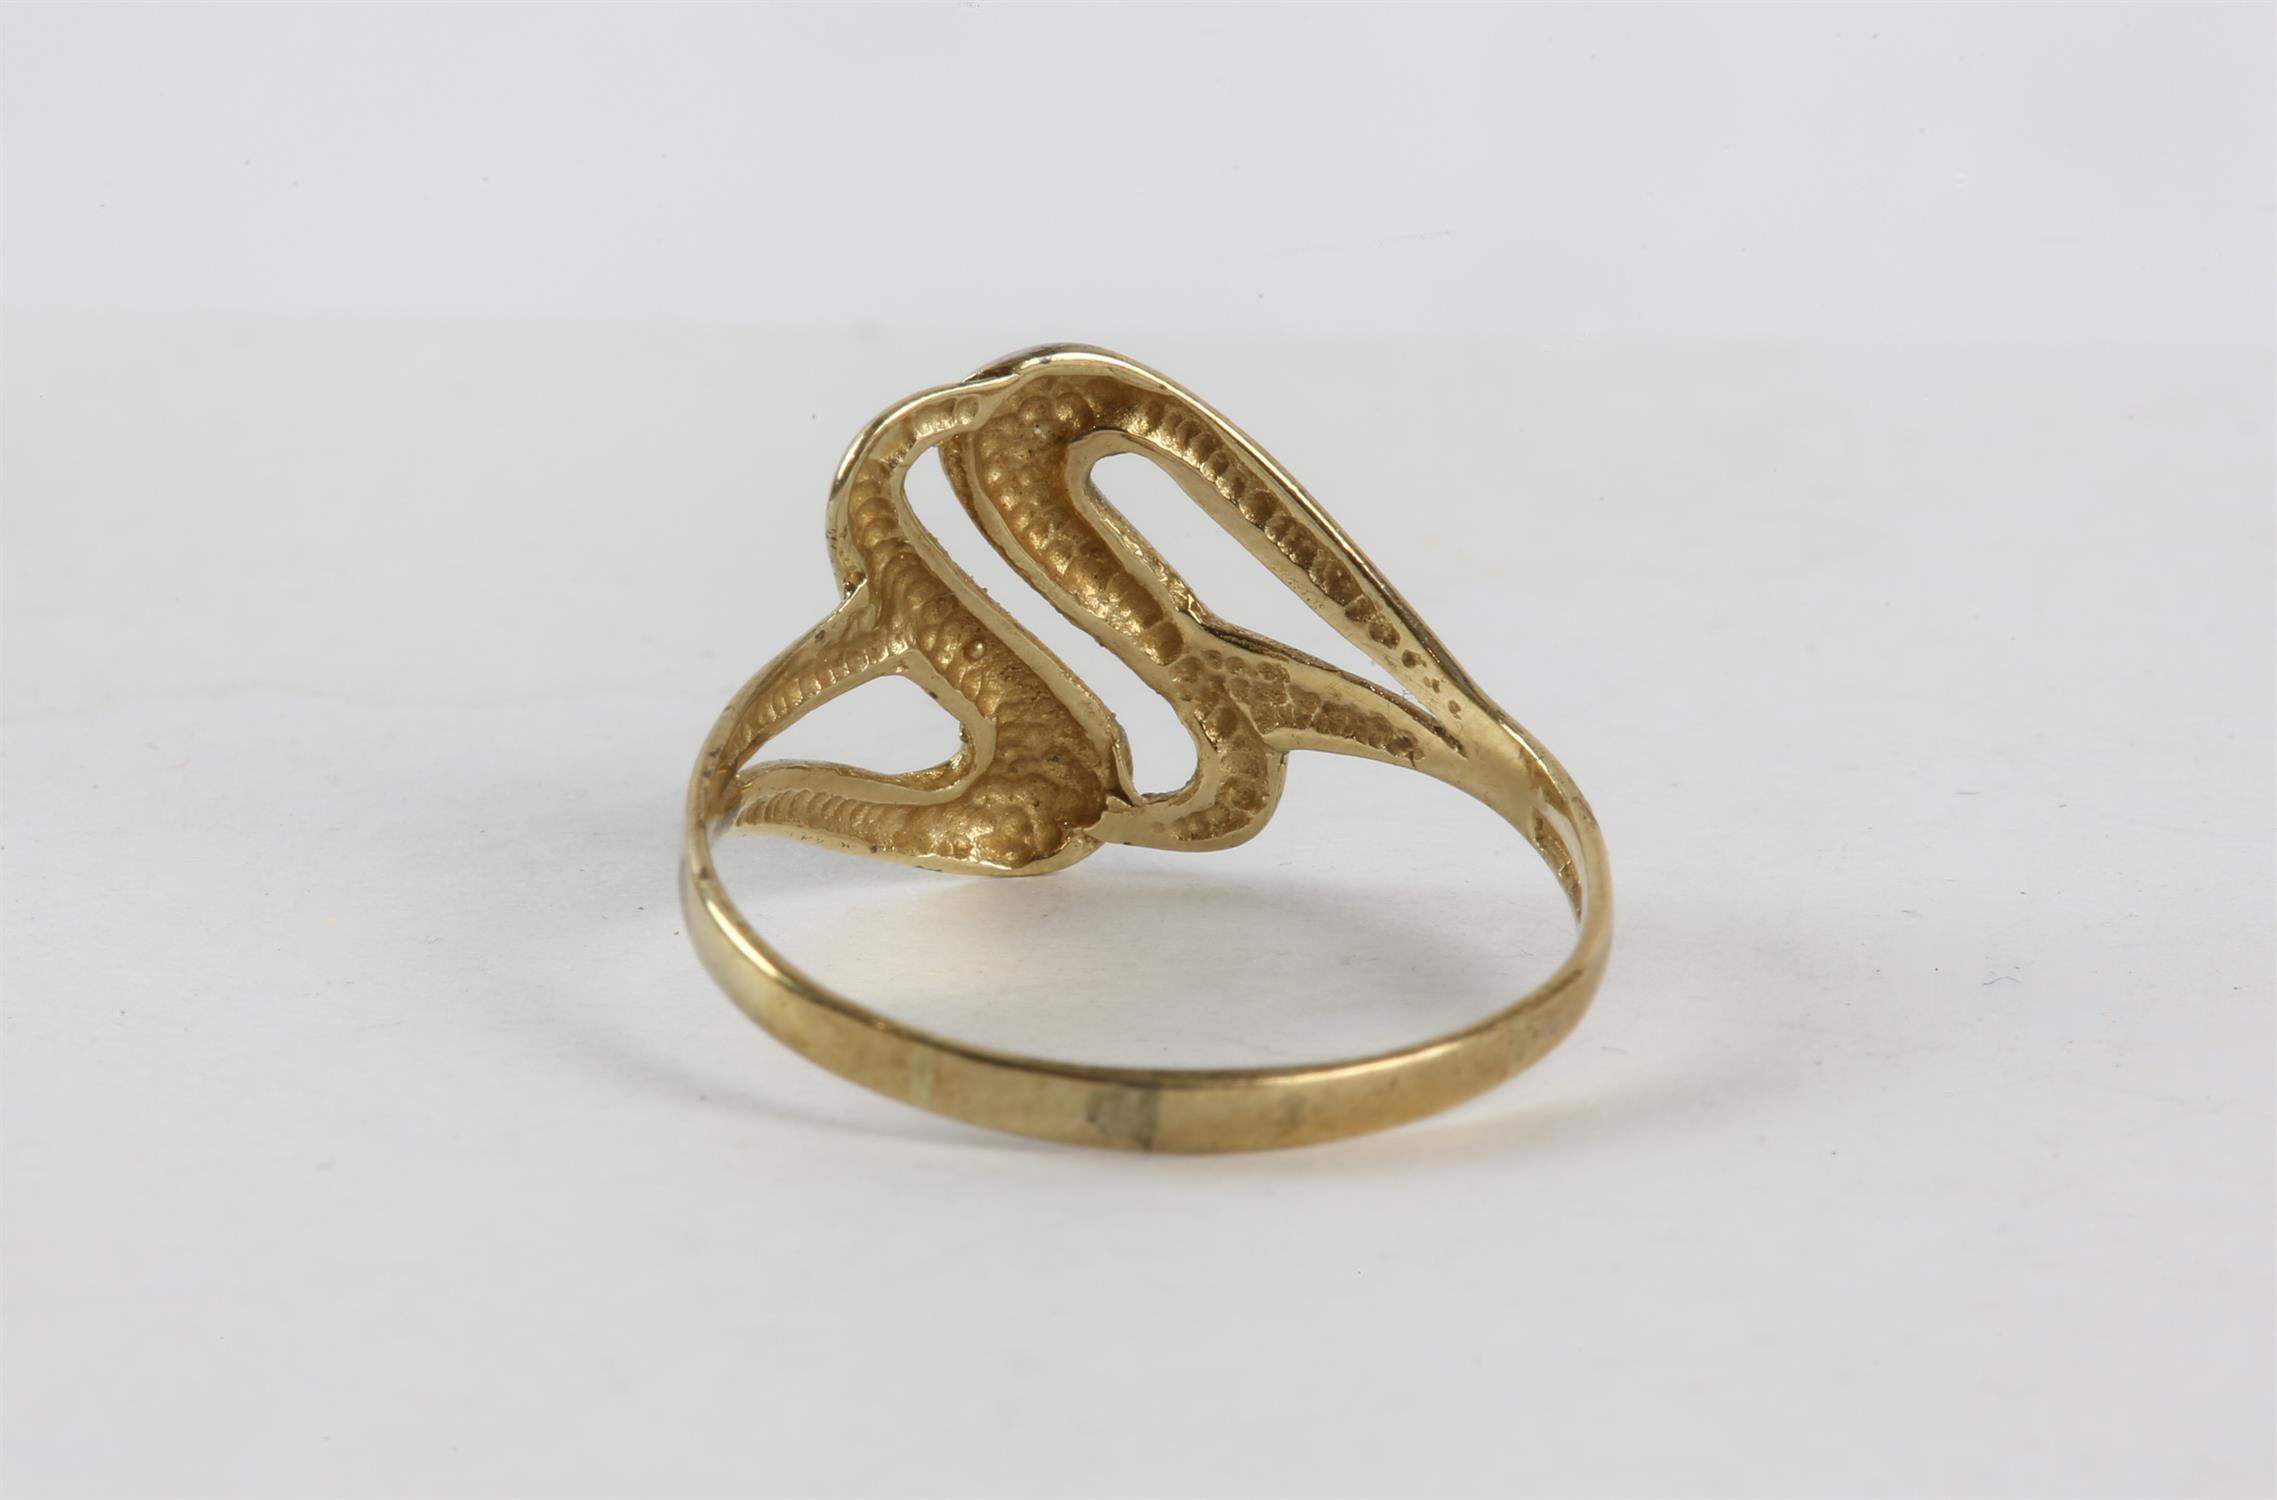 Bicolour gold swirl pattern ring, stamped 9ct, ring size R, 1.8 grams - Image 2 of 2